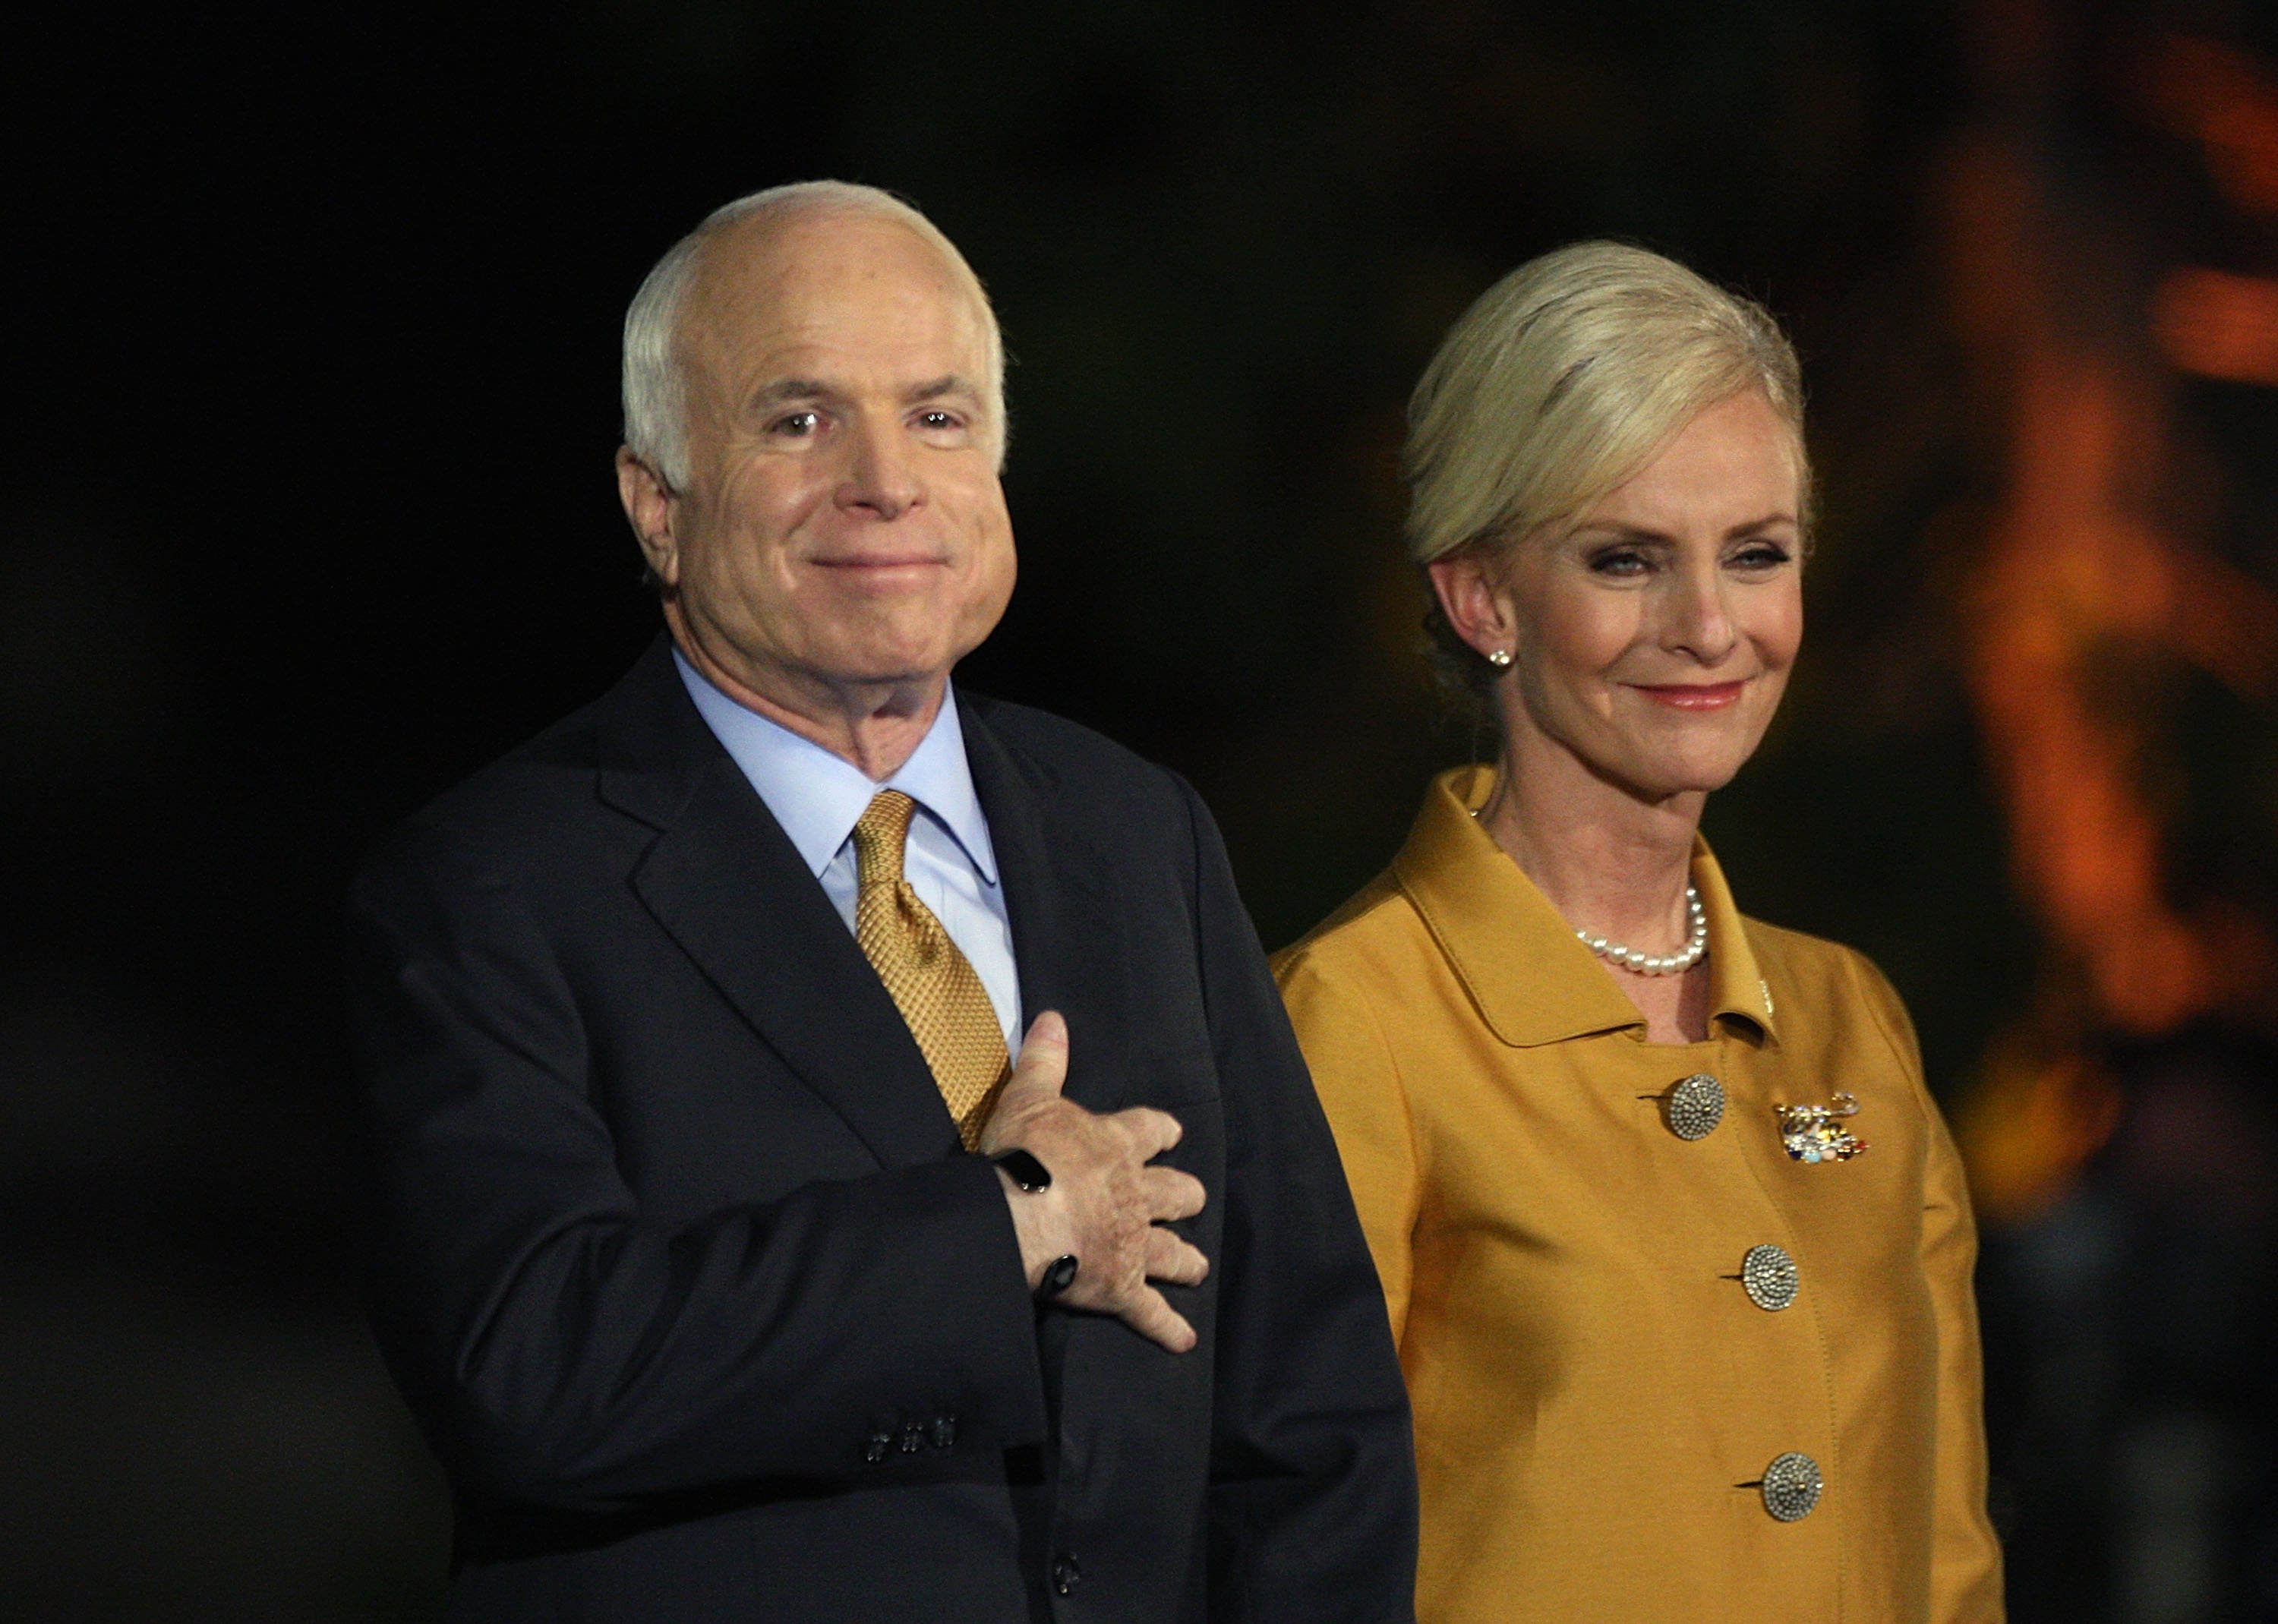 John McCain conceding victory on stage with his wife Cindy McCain during the election night rally at the Arizona Biltmore Resort & Spa on November 4, 2008 in Phoenix, Arizona | Photo: Getty Images